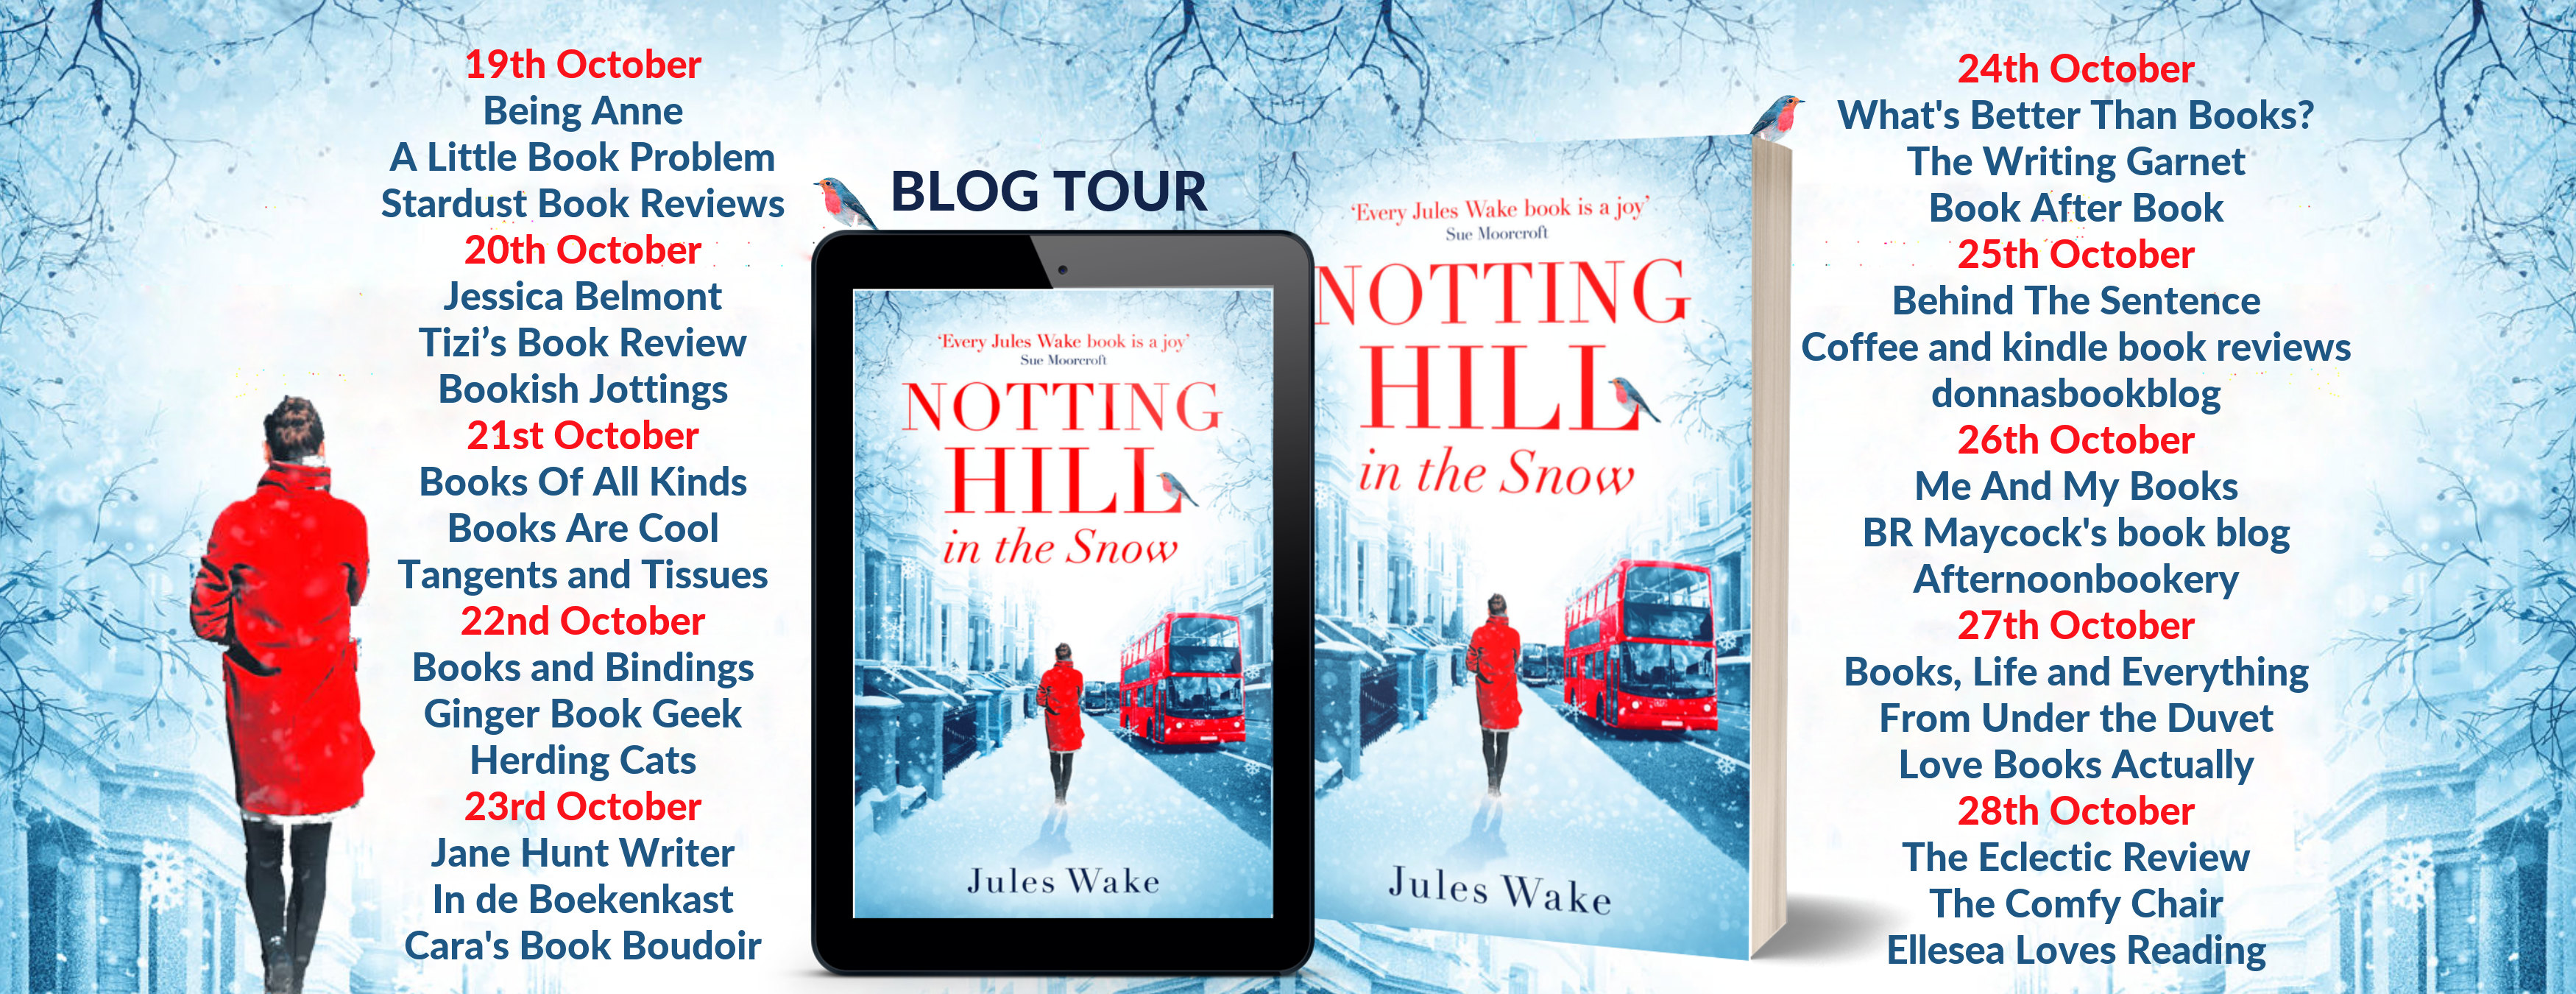 Notting Hill in the Snow Full Tour Banner